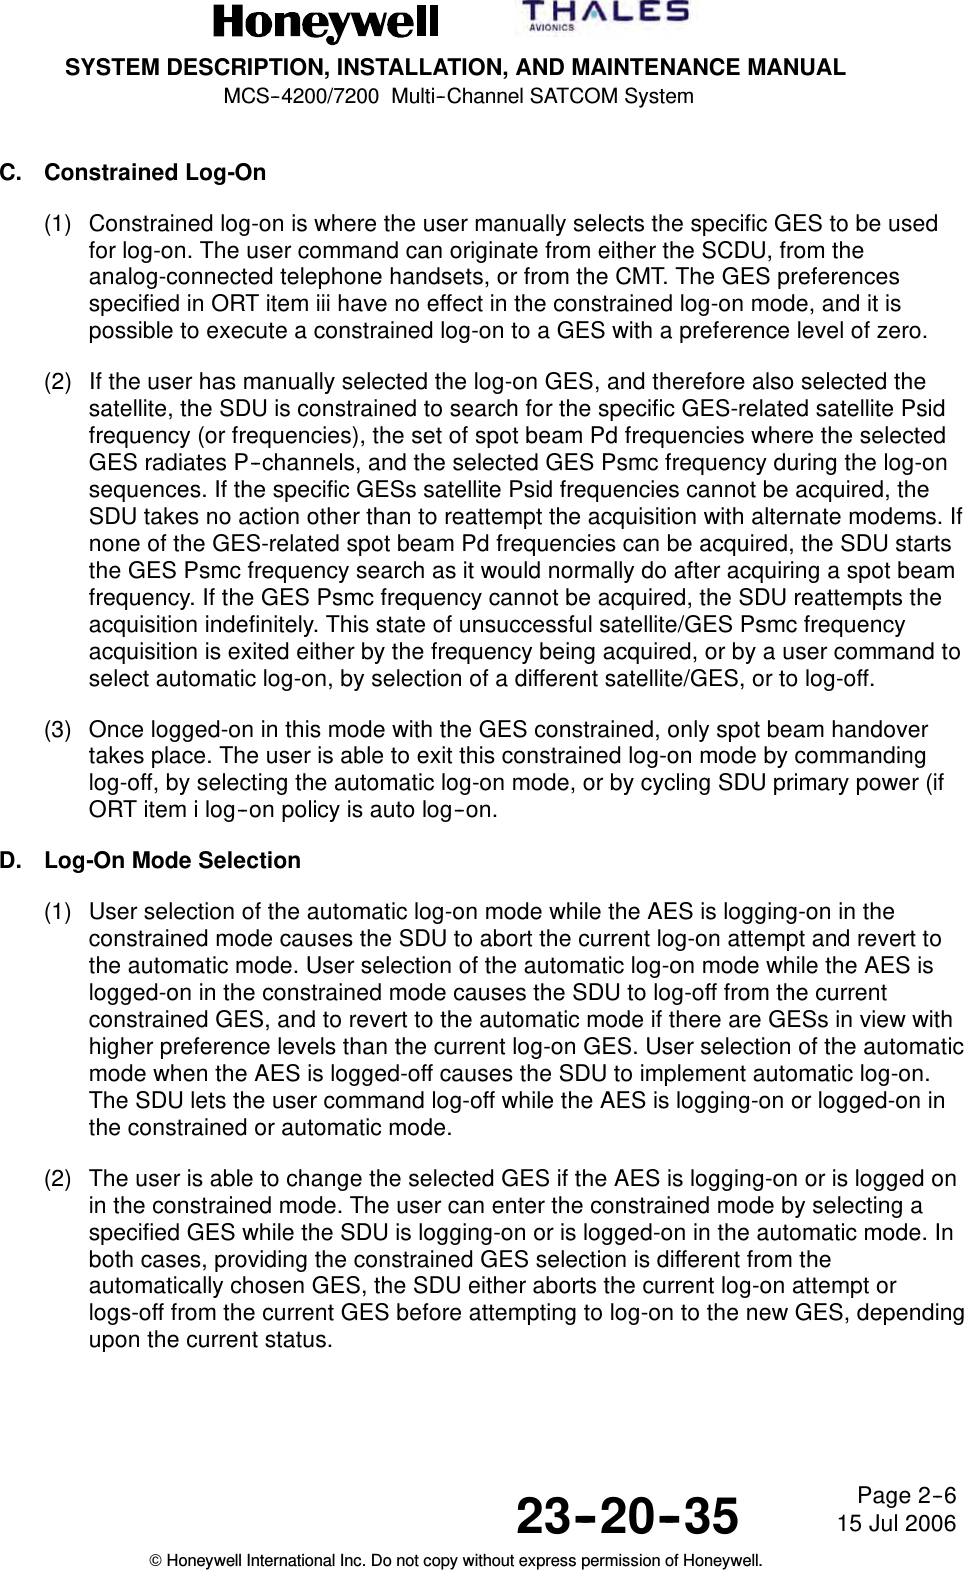 SYSTEM DESCRIPTION, INSTALLATION, AND MAINTENANCE MANUALMCS--4200/7200 Multi--Channel SATCOM System23--20--35 15 Jul 2006Honeywell International Inc. Do not copy without express permission of Honeywell.Page 2--6C. Constrained Log-On(1) Constrained log-on is where the user manually selects the specific GES to be usedfor log-on. The user command can originate from either the SCDU, from theanalog-connected telephone handsets, or from the CMT. The GES preferencesspecified in ORT item iii have no effect in the constrained log-on mode, and it ispossible to execute a constrained log-on to a GES with a preference level of zero.(2) If the user has manually selected the log-on GES, and therefore also selected thesatellite, the SDU is constrained to search for the specific GES-related satellite Psidfrequency (or frequencies), the set of spot beam Pd frequencies where the selectedGES radiates P--channels, and the selected GES Psmc frequency during the log-onsequences. If the specific GESs satellite Psid frequencies cannot be acquired, theSDU takes no action other than to reattempt the acquisition with alternate modems. Ifnone of the GES-related spot beam Pd frequencies can be acquired, the SDU startsthe GES Psmc frequency search as it would normally do after acquiring a spot beamfrequency. If the GES Psmc frequency cannot be acquired, the SDU reattempts theacquisition indefinitely. This state of unsuccessful satellite/GES Psmc frequencyacquisition is exited either by the frequency being acquired, or by a user command toselect automatic log-on, by selection of a different satellite/GES, or to log-off.(3) Once logged-on in this mode with the GES constrained, only spot beam handovertakes place. The user is able to exit this constrained log-on mode by commandinglog-off, by selecting the automatic log-on mode, or by cycling SDU primary power (ifORT item i log--on policy is auto log--on.D. Log-On Mode Selection(1) User selection of the automatic log-on mode while the AES is logging-on in theconstrained mode causes the SDU to abort the current log-on attempt and revert tothe automatic mode. User selection of the automatic log-on mode while the AES islogged-on in the constrained mode causes the SDU to log-off from the currentconstrained GES, and to revert to the automatic mode if there are GESs in view withhigher preference levels than the current log-on GES. User selection of the automaticmode when the AES is logged-off causes the SDU to implement automatic log-on.The SDU lets the user command log-off while the AES is logging-on or logged-on inthe constrained or automatic mode.(2) The user is able to change the selected GES if the AES is logging-on or is logged onin the constrained mode. The user can enter the constrained mode by selecting aspecified GES while the SDU is logging-on or is logged-on in the automatic mode. Inboth cases, providing the constrained GES selection is different from theautomatically chosen GES, the SDU either aborts the current log-on attempt orlogs-off from the current GES before attempting to log-on to the new GES, dependingupon the current status.